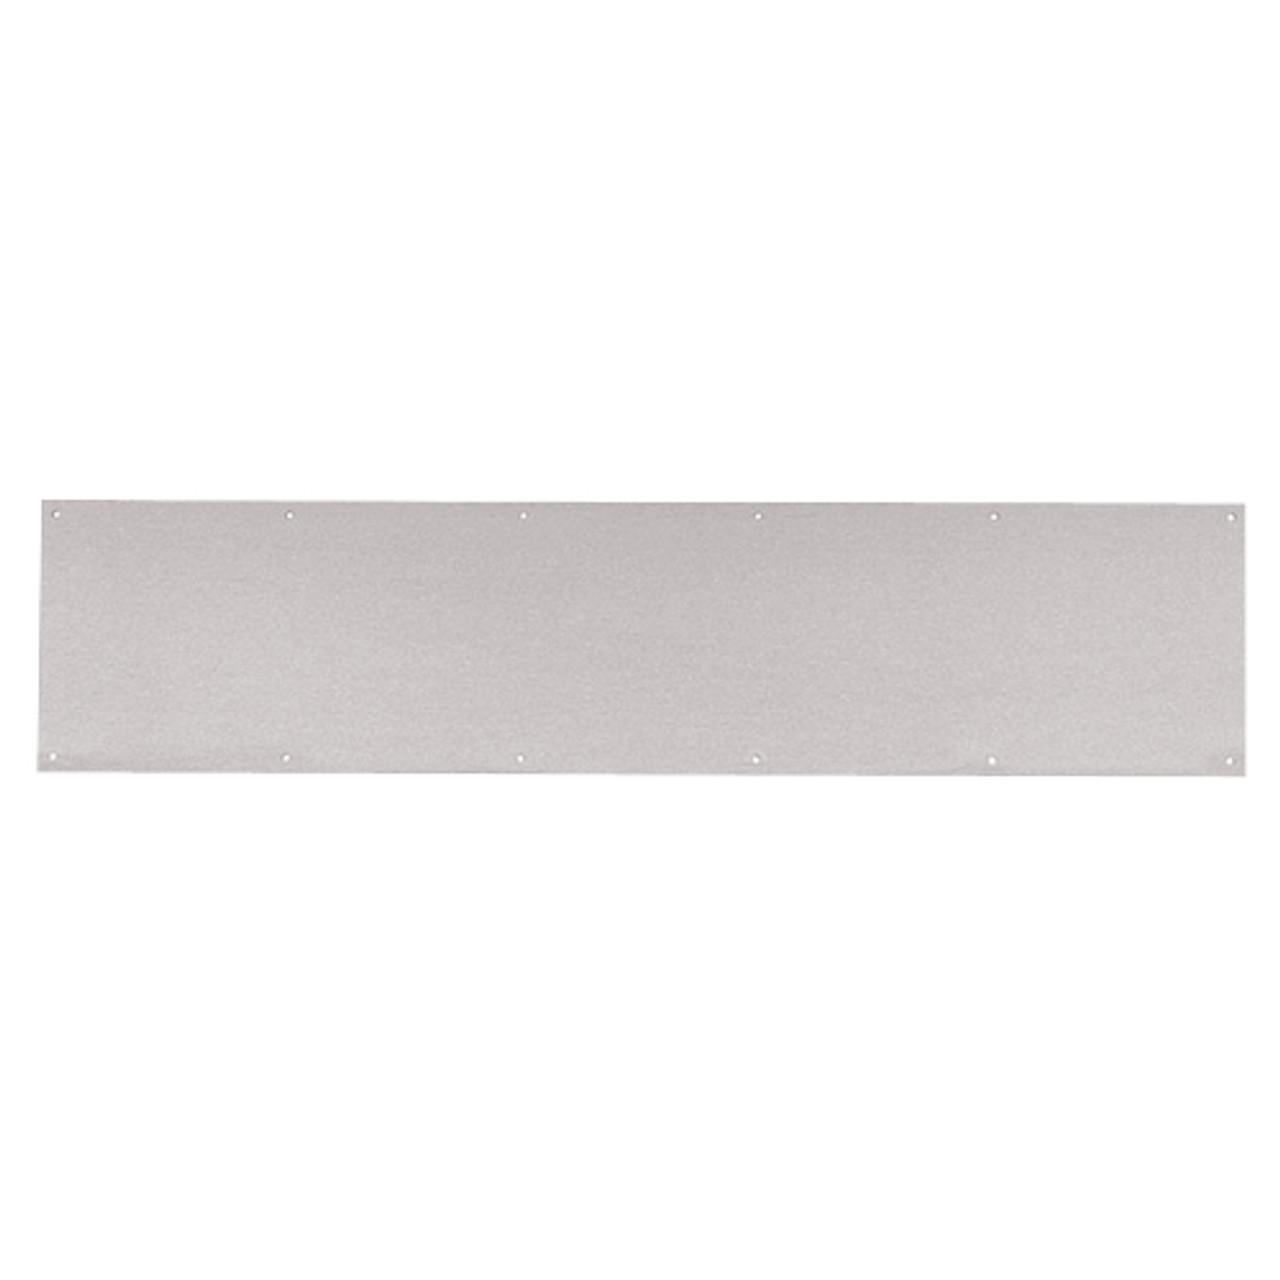 8400-US32D-41x33-B-CS Ives 8400 Series Protection Plate in Satin Stainless Steel